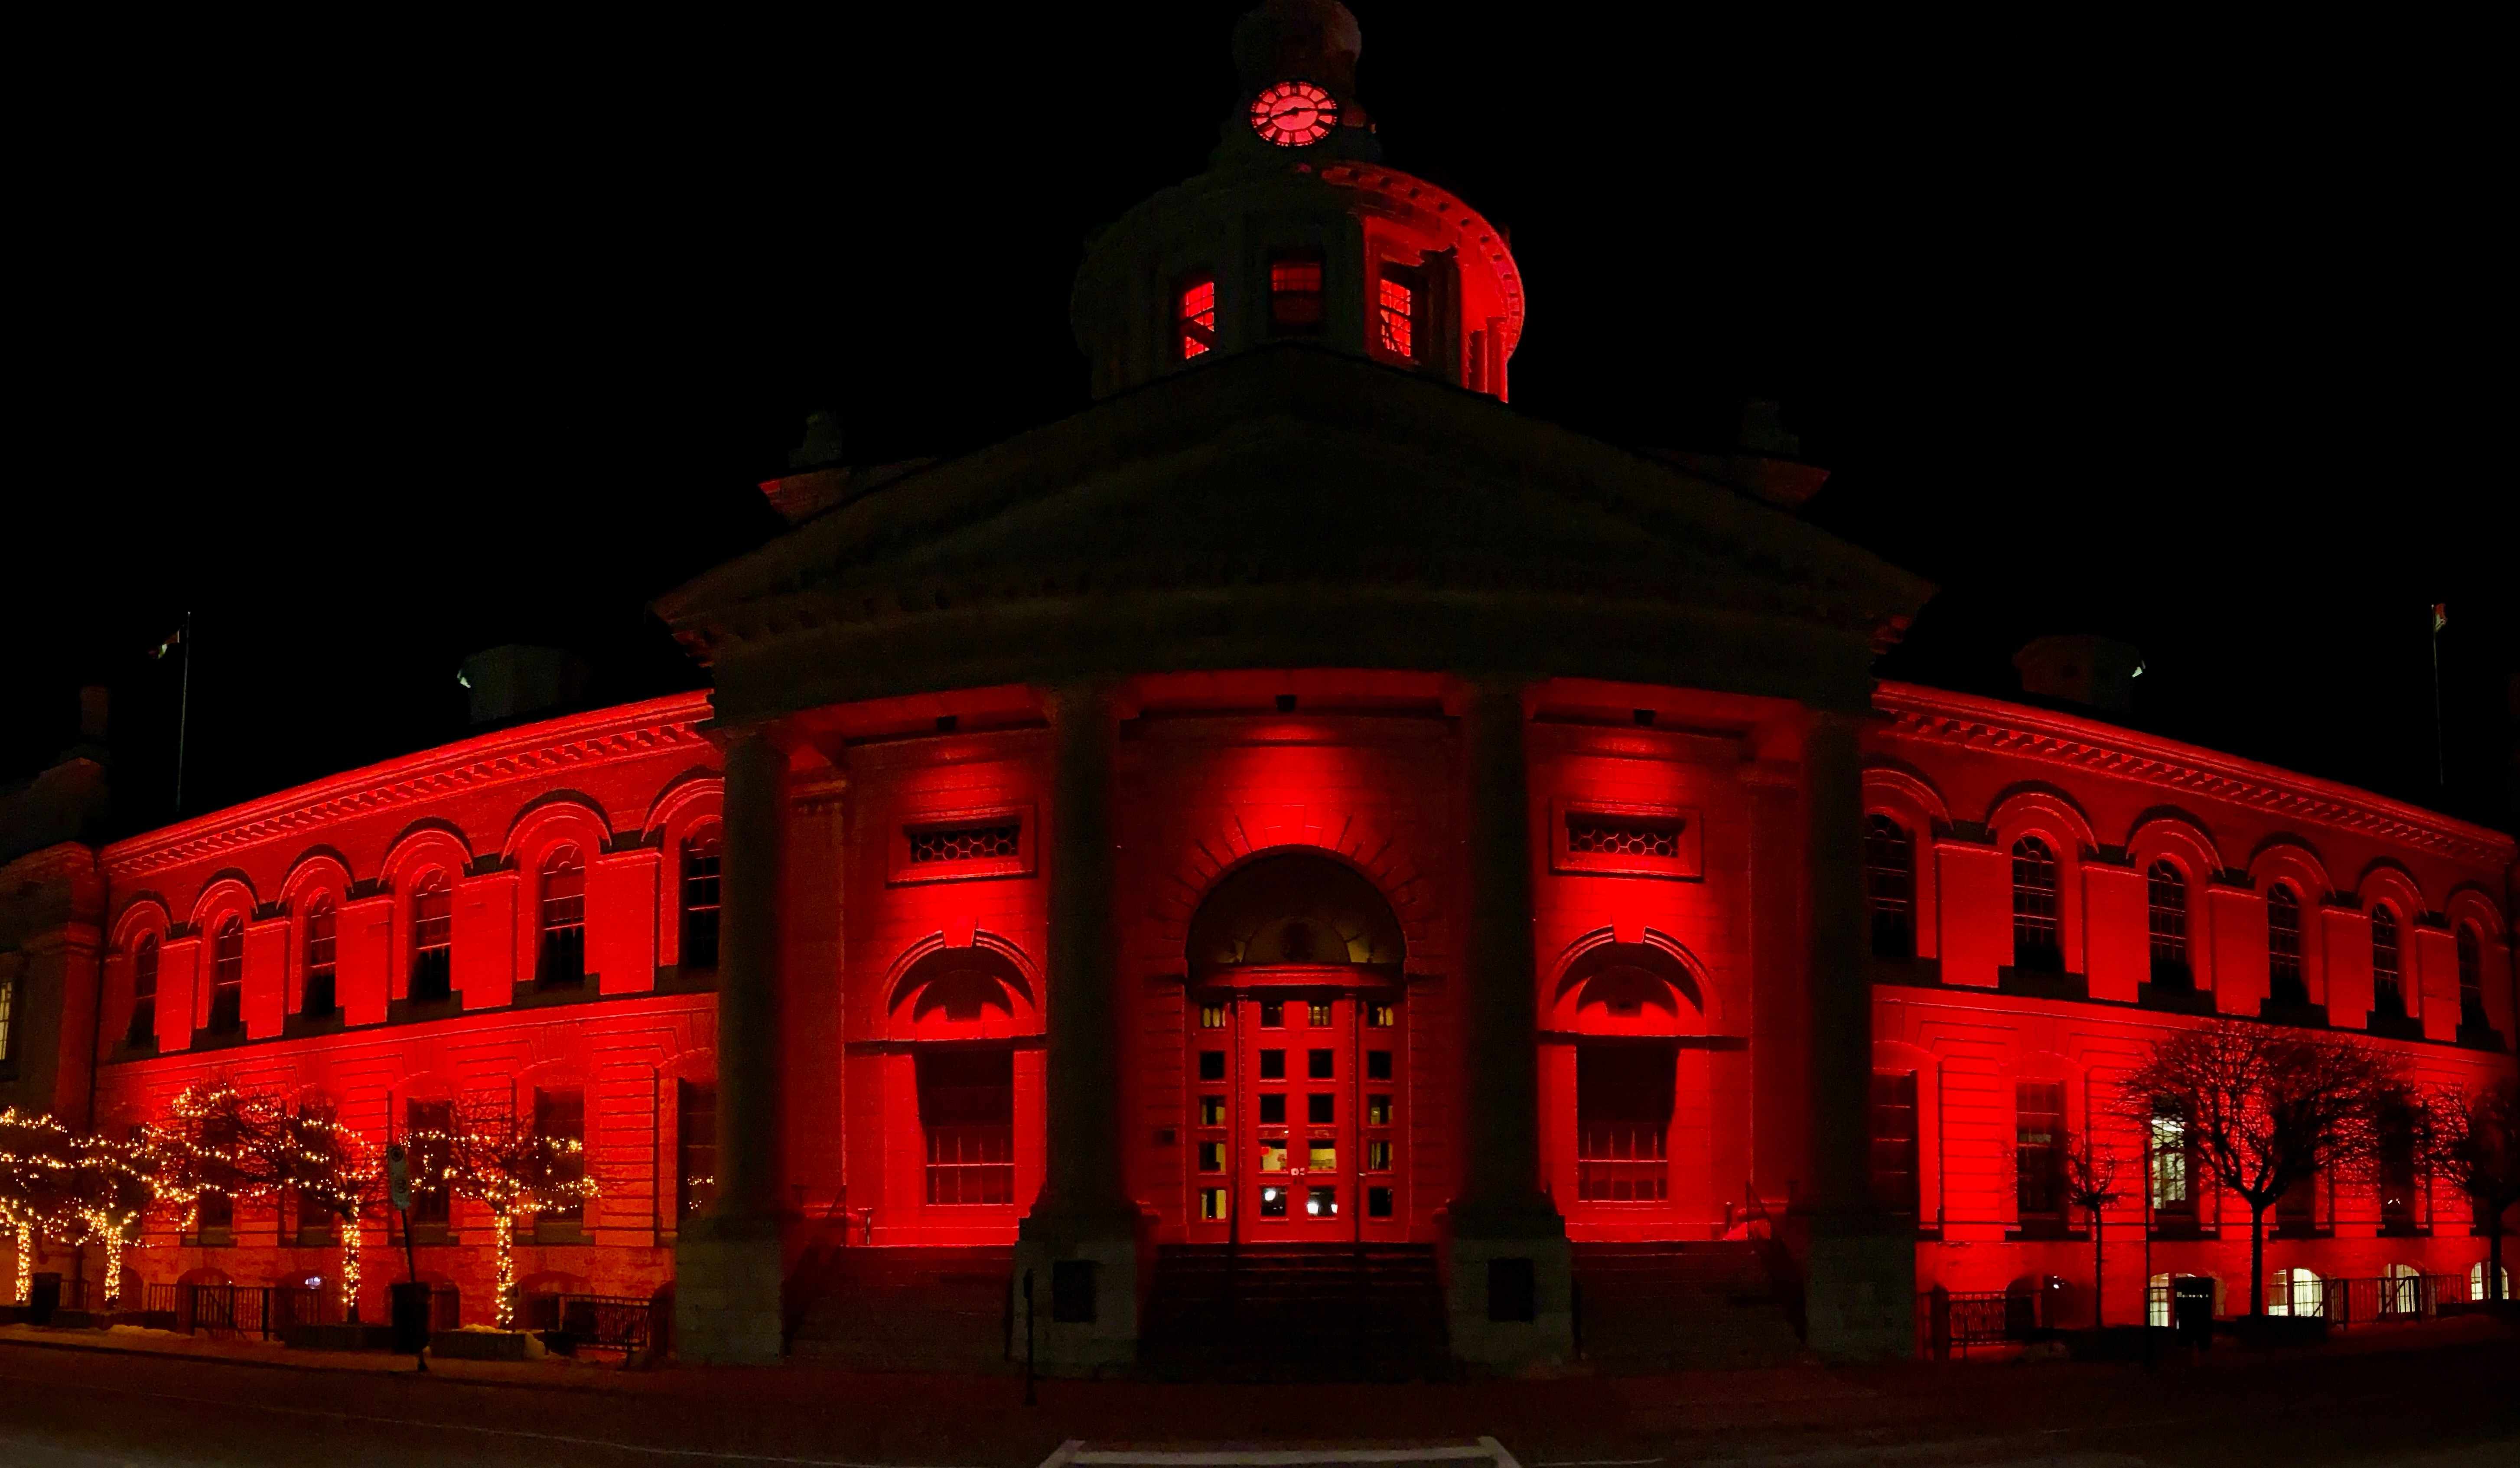 Building in red